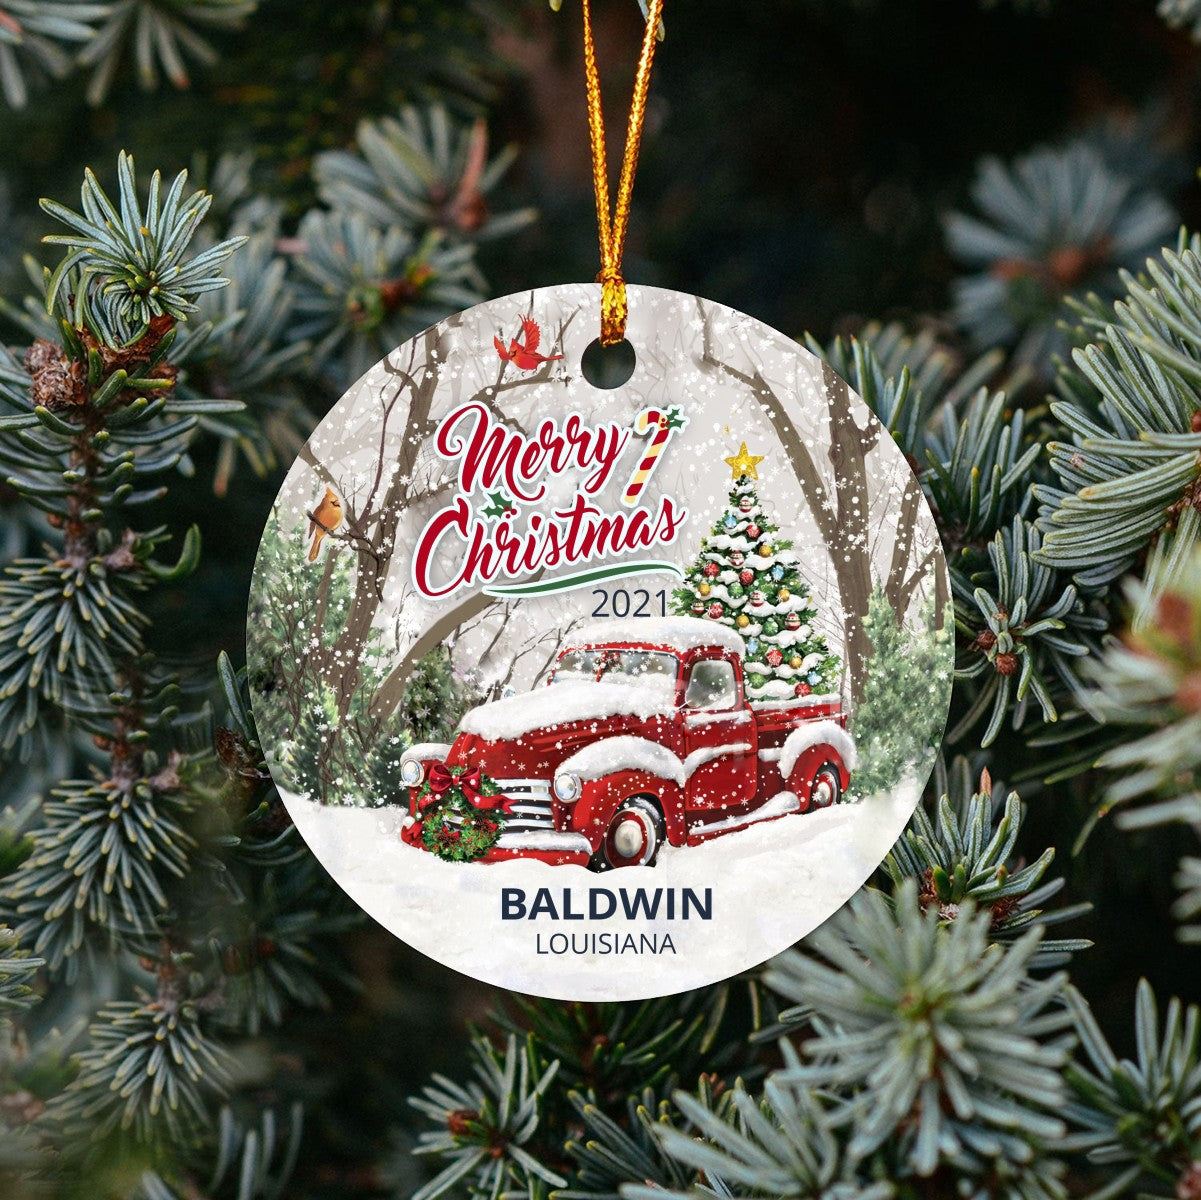 Christmas Tree Ornaments Baldwin - Ornament With Name City, State Baldwin Louisiana LA Ornament - Red Truck Xmas Ornaments 3'' Plastic Gift For Family, Friend And Housewarming